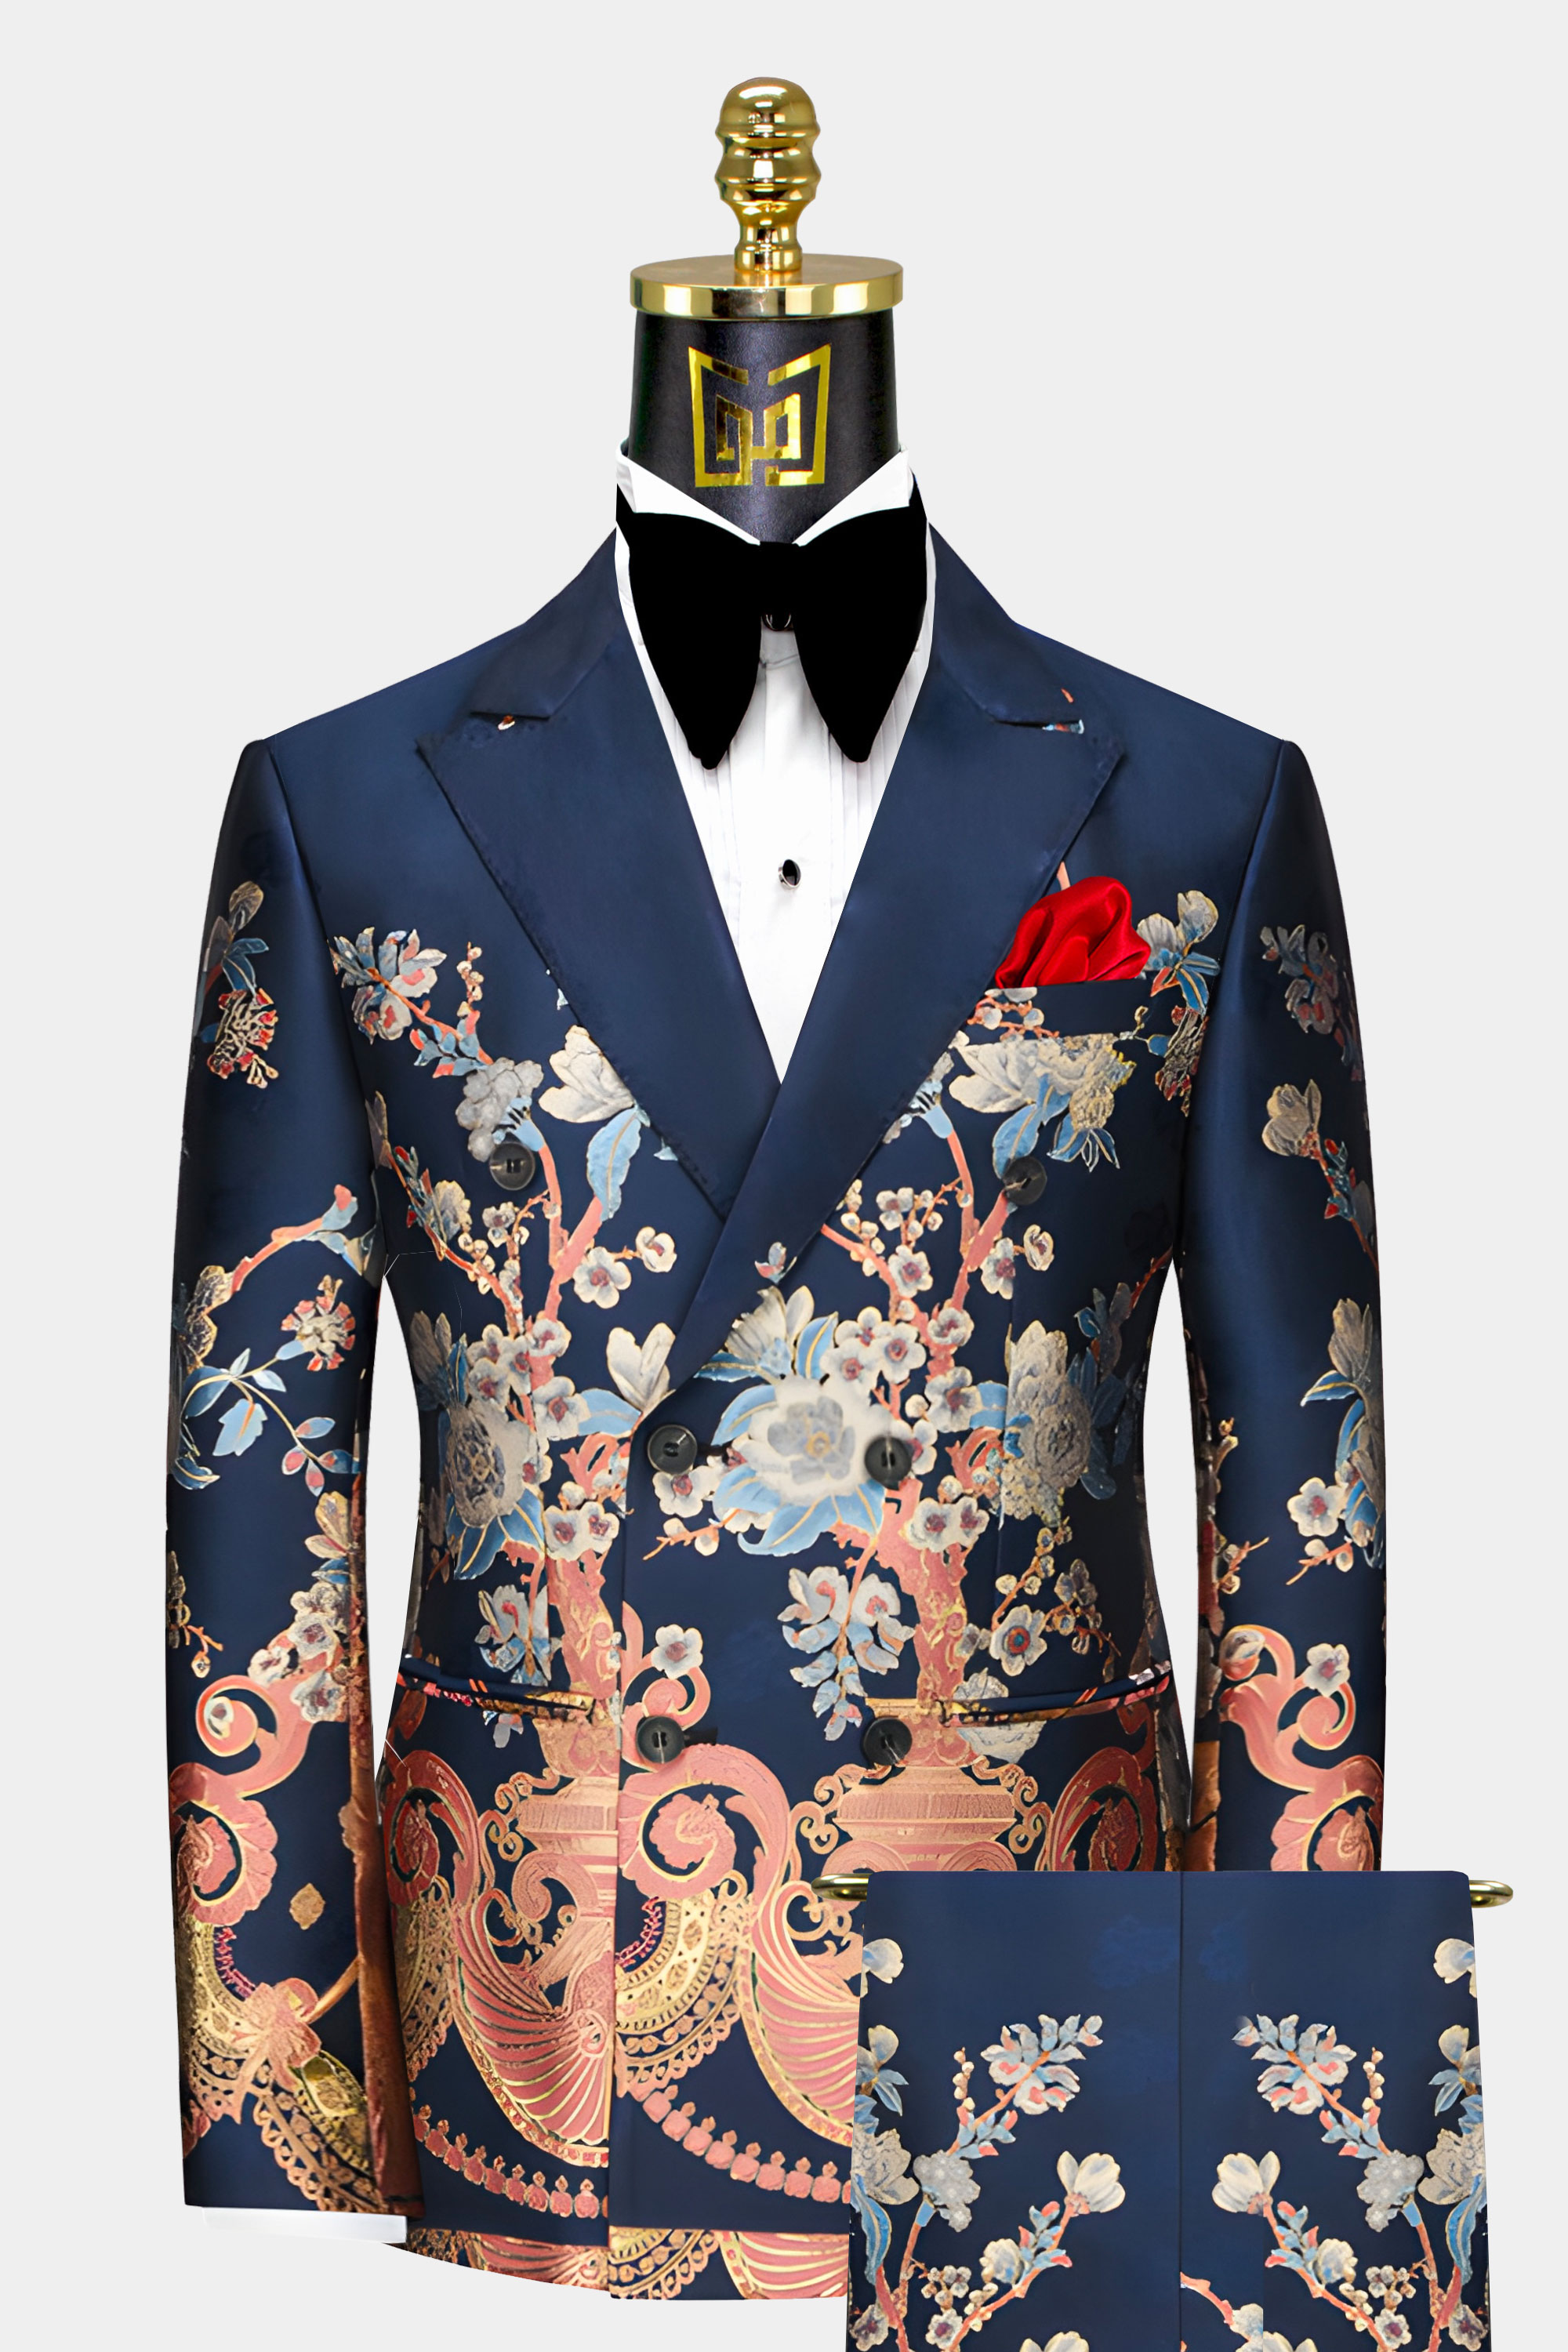 Embroidered Flower Slim Fit Shirt - Men - Ready to Wear